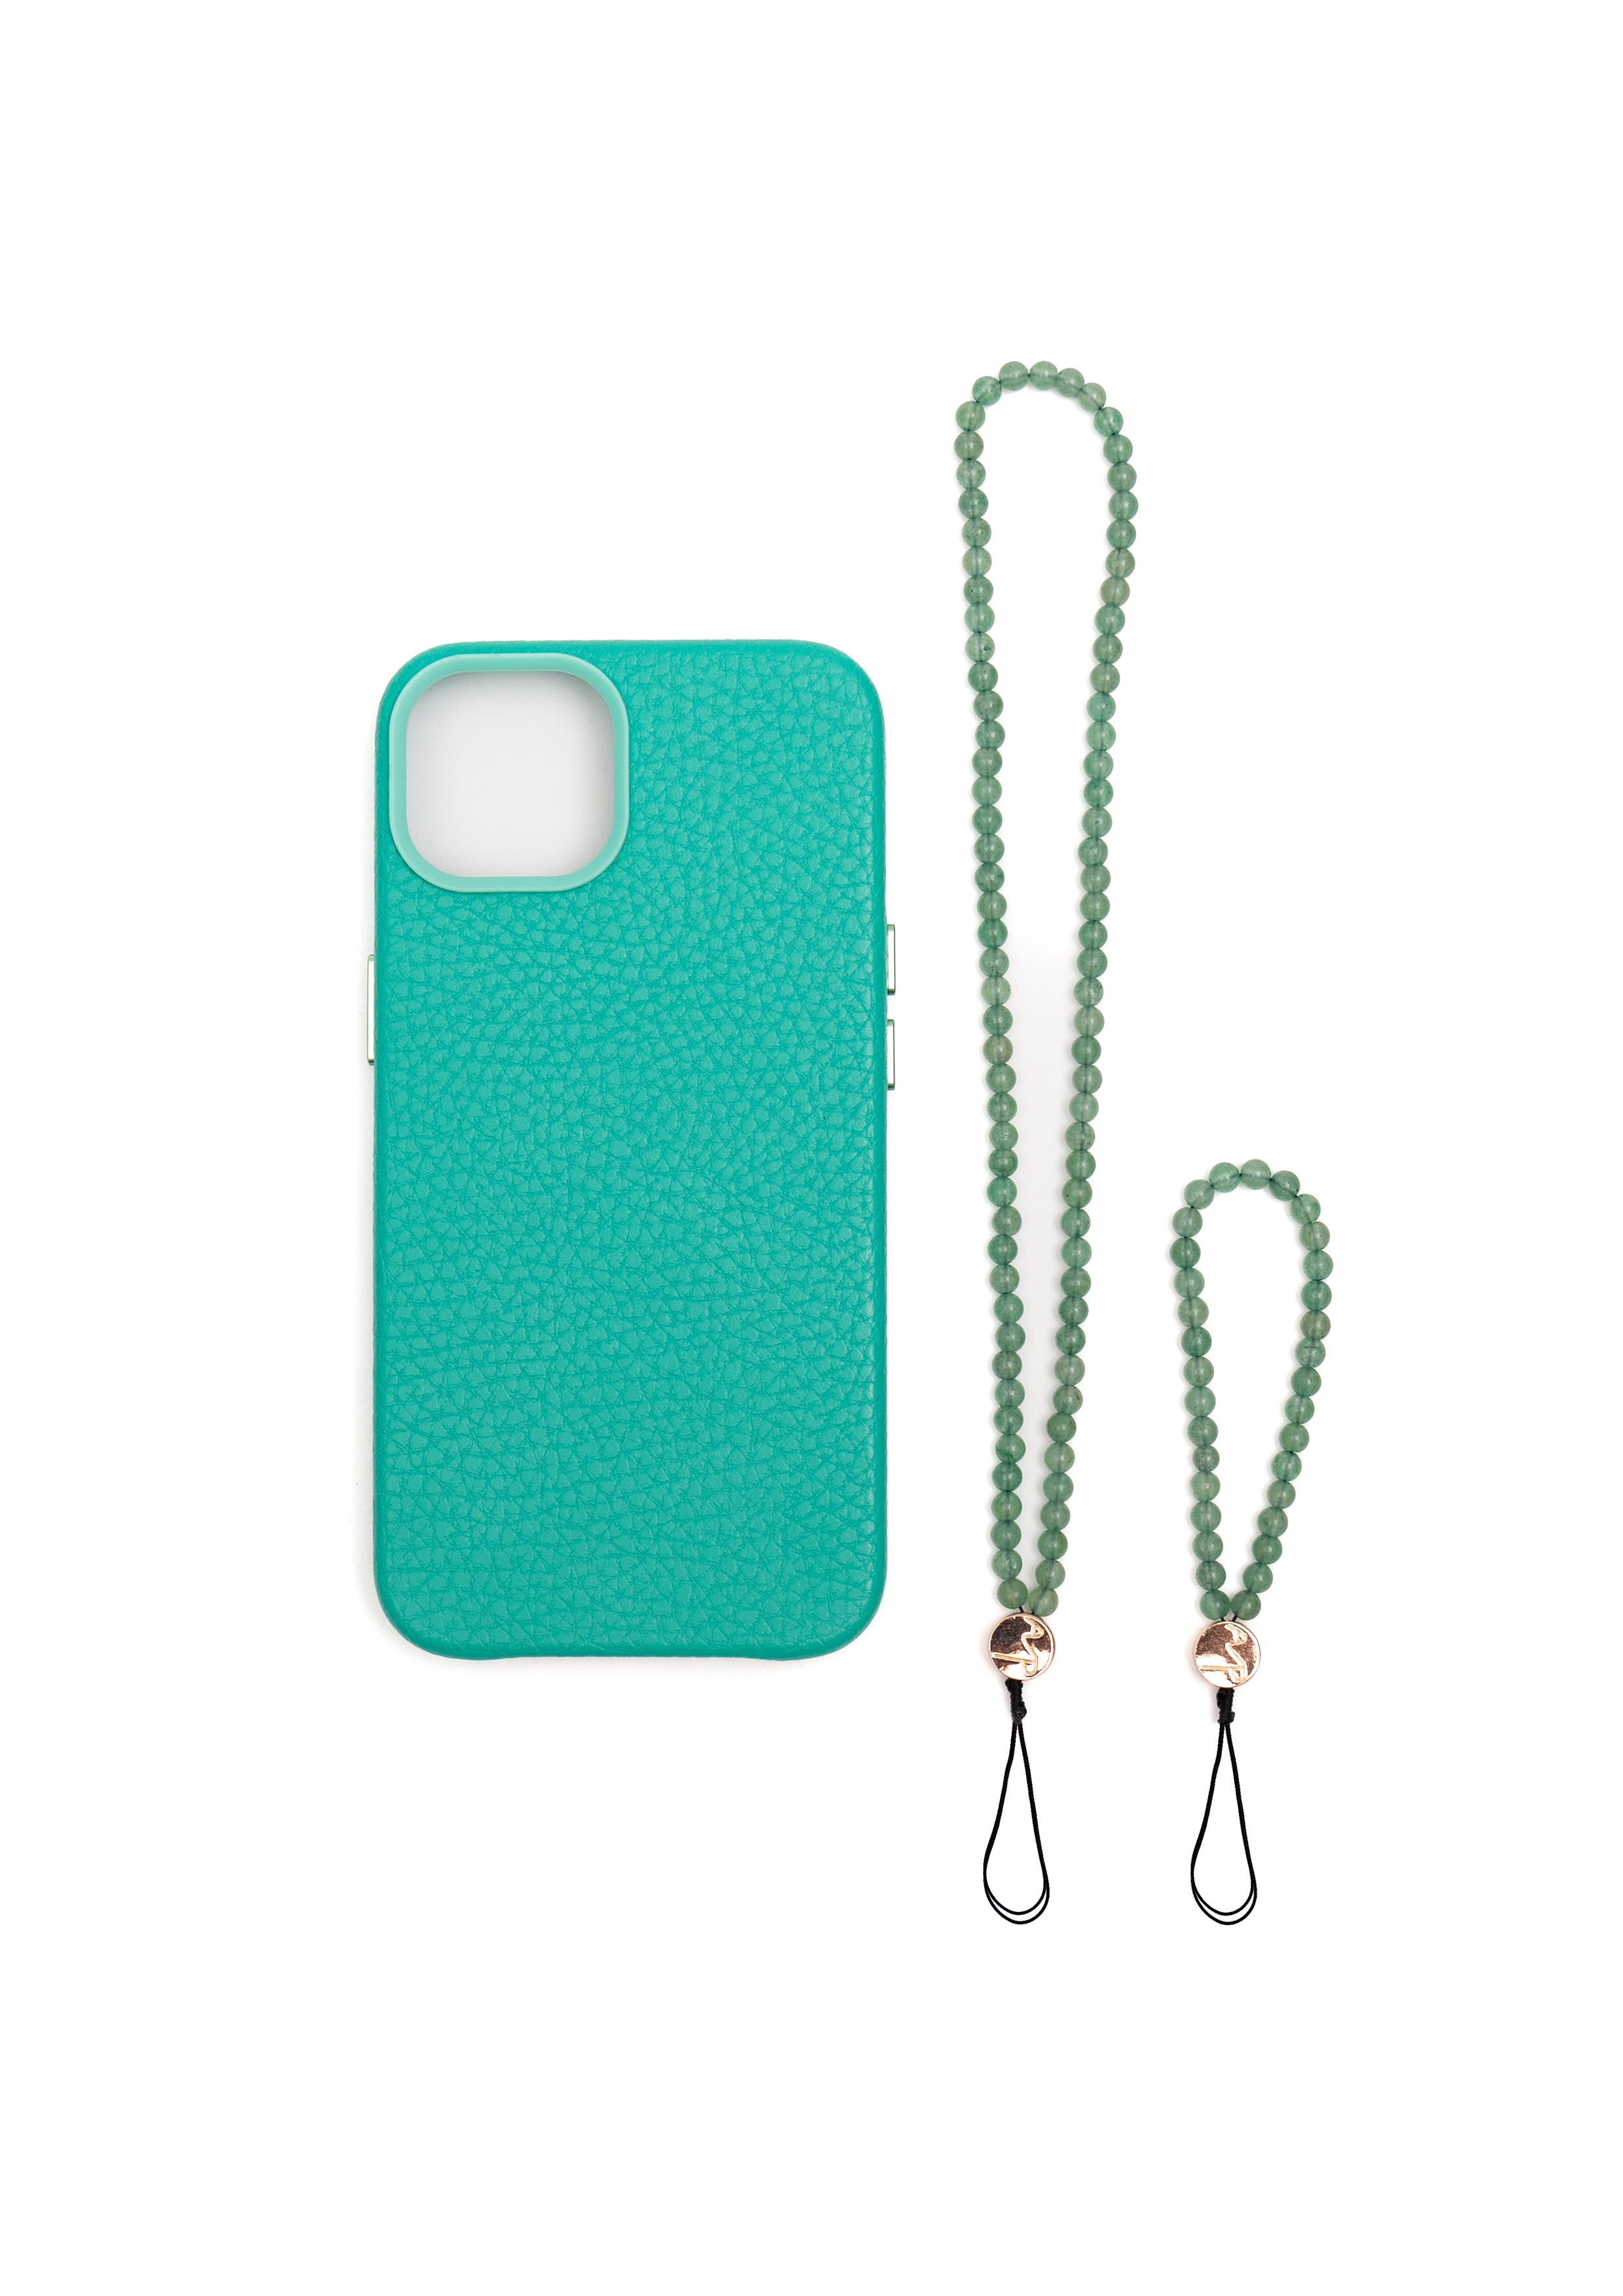 Teal AMP Phone Cover